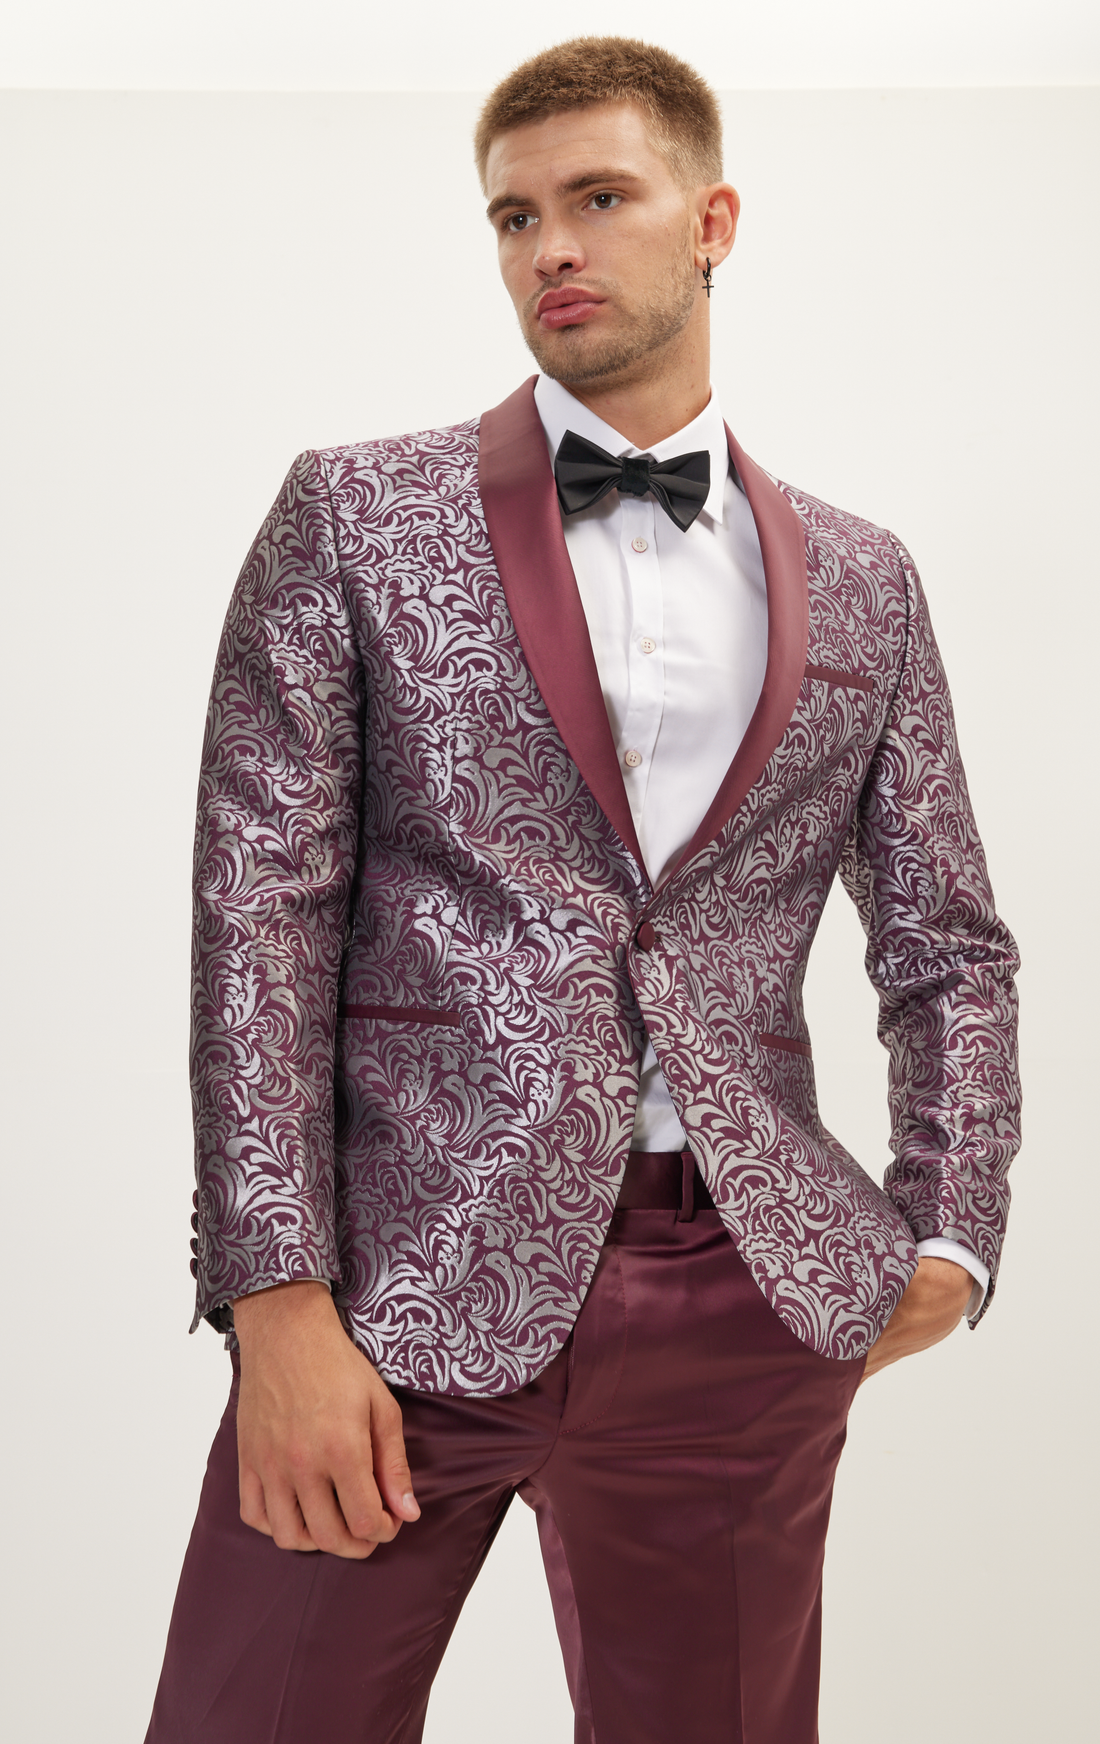 N° 1050 ABSTRACT FLORAL TUXEDO - BURGUNDY